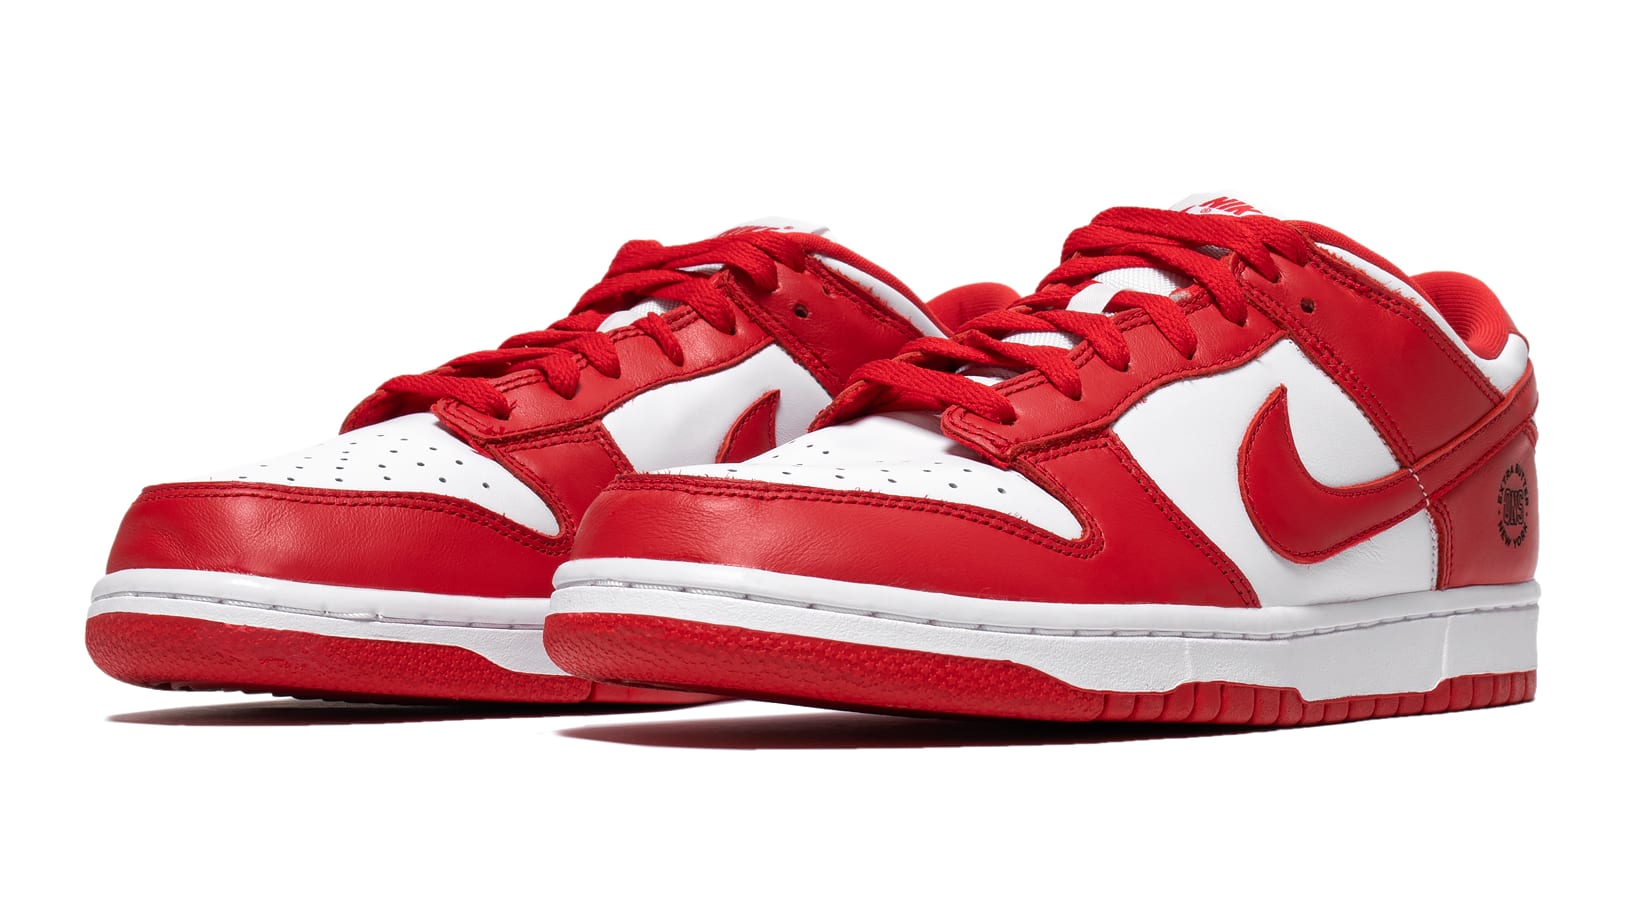 Extra Butter Is Raffling Off Custom Nike Dunk Lows For Charity